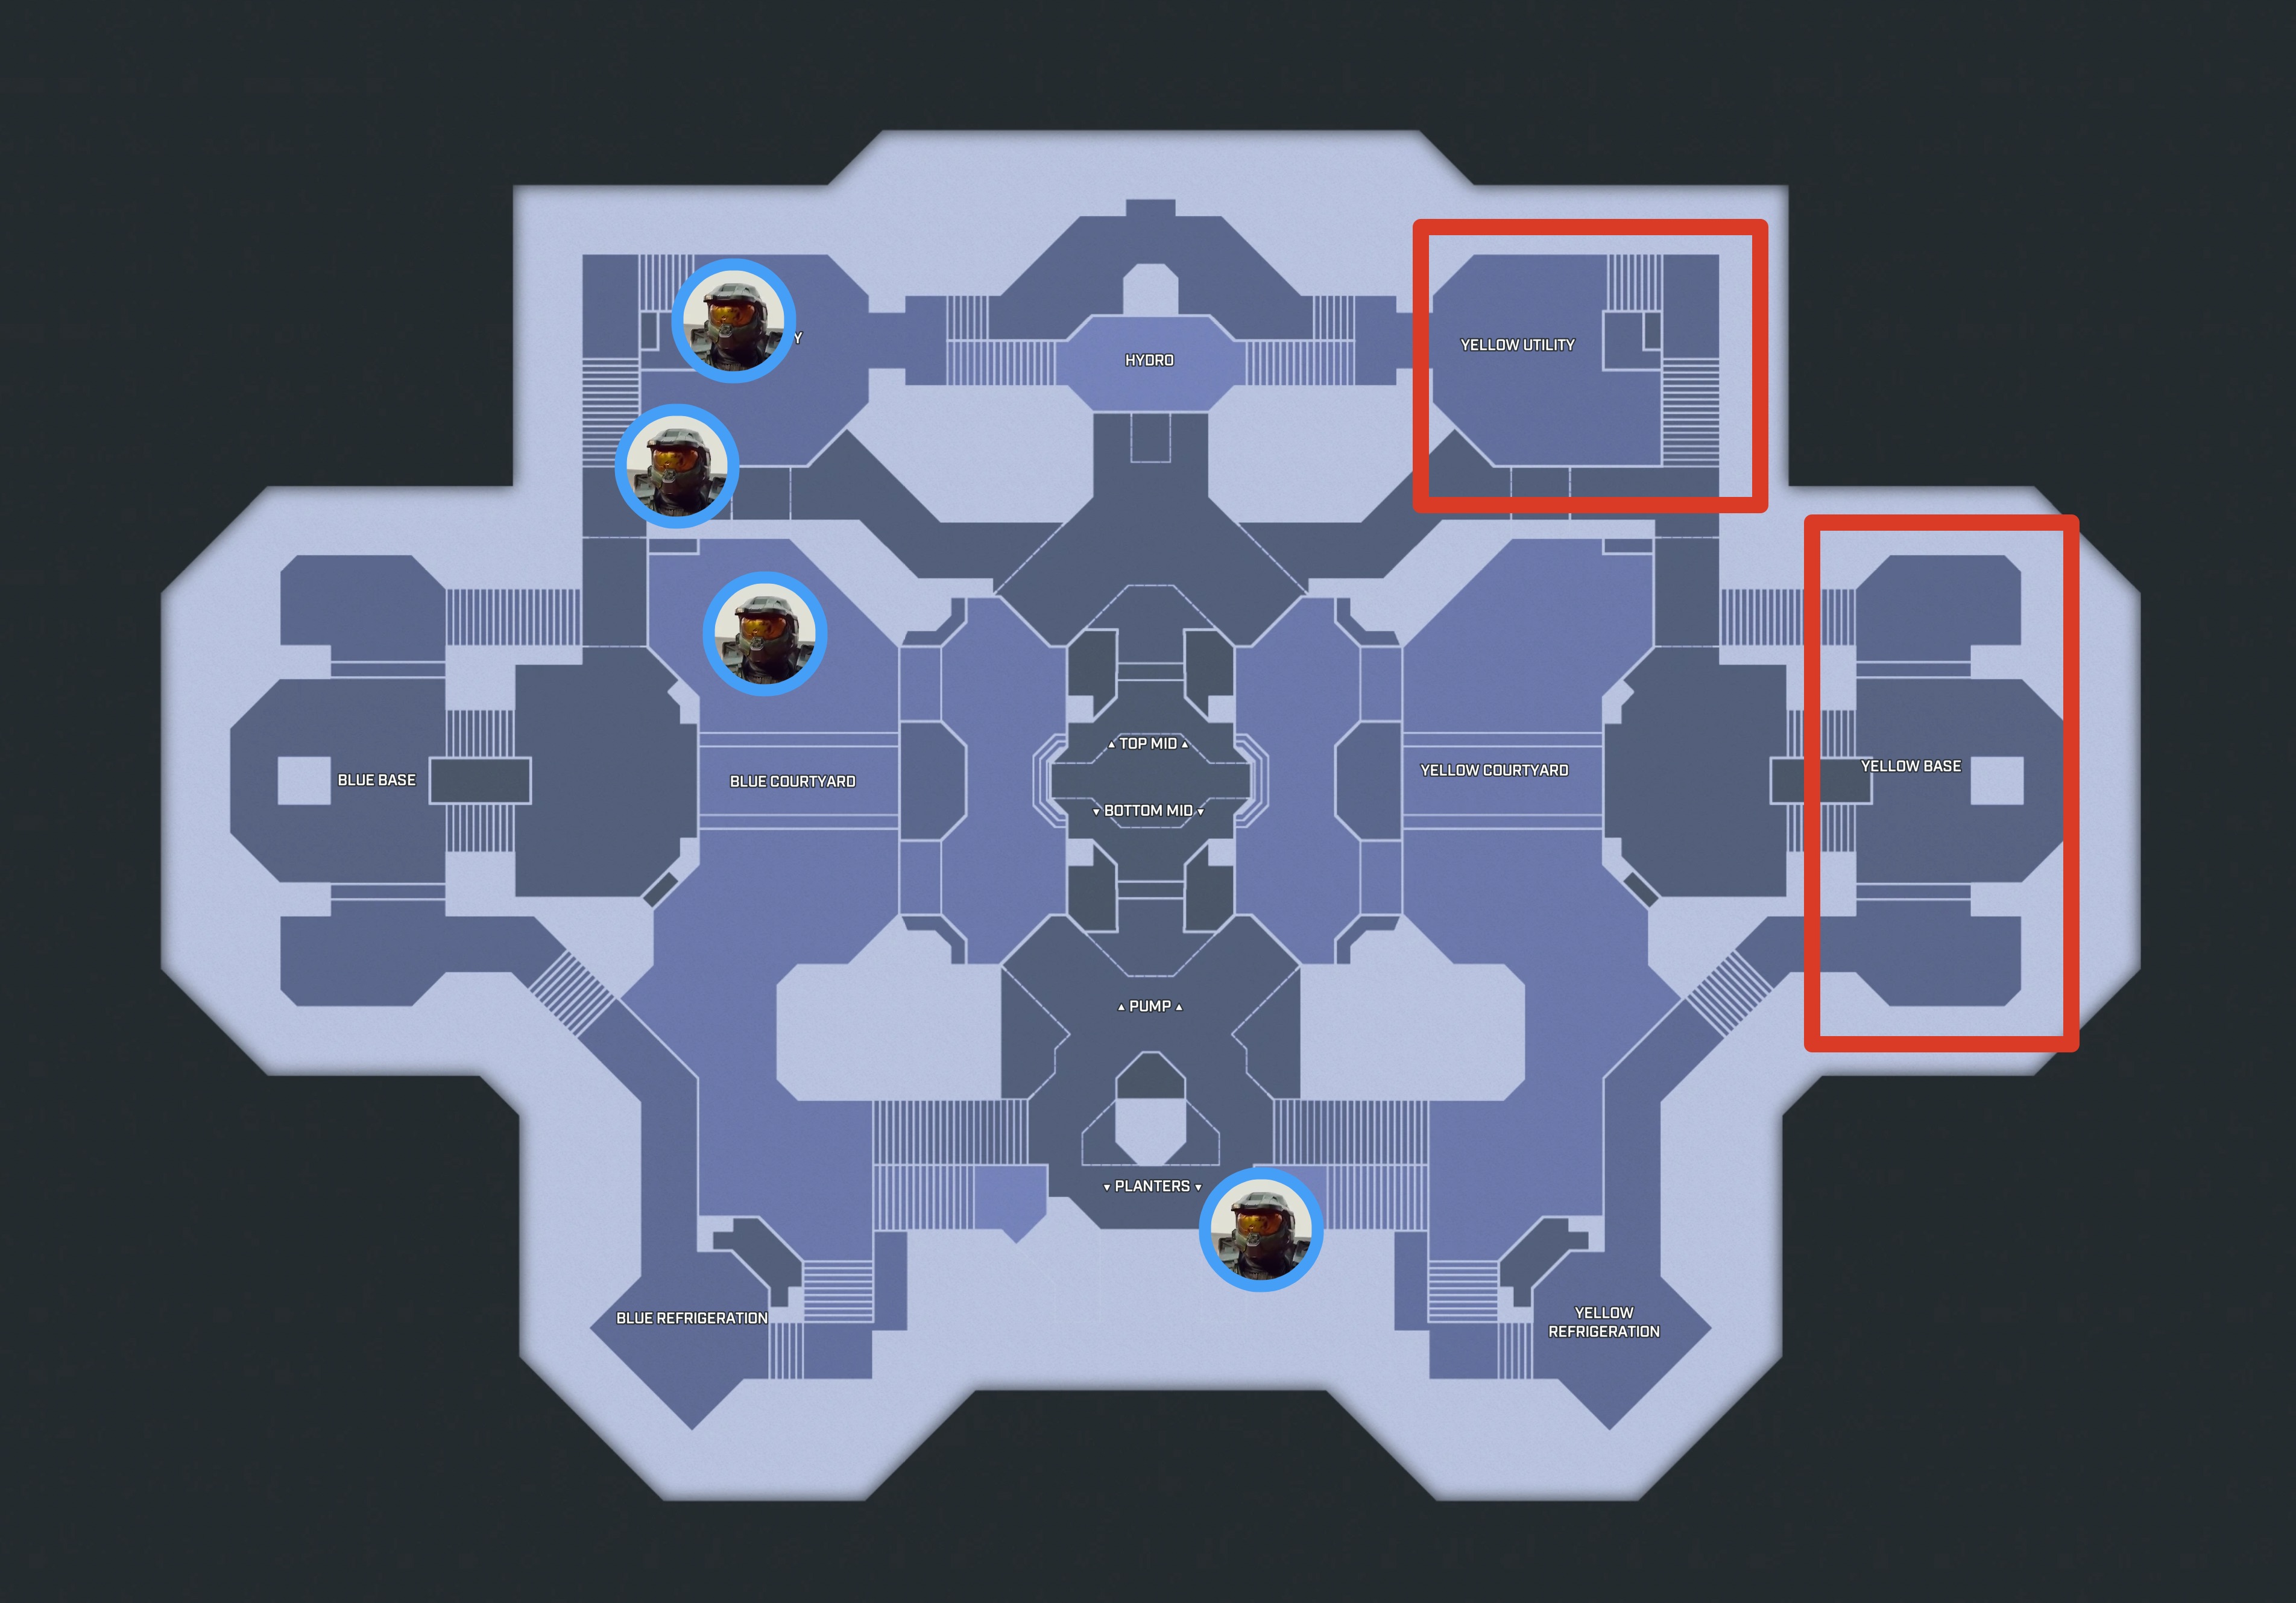 Respawn positions